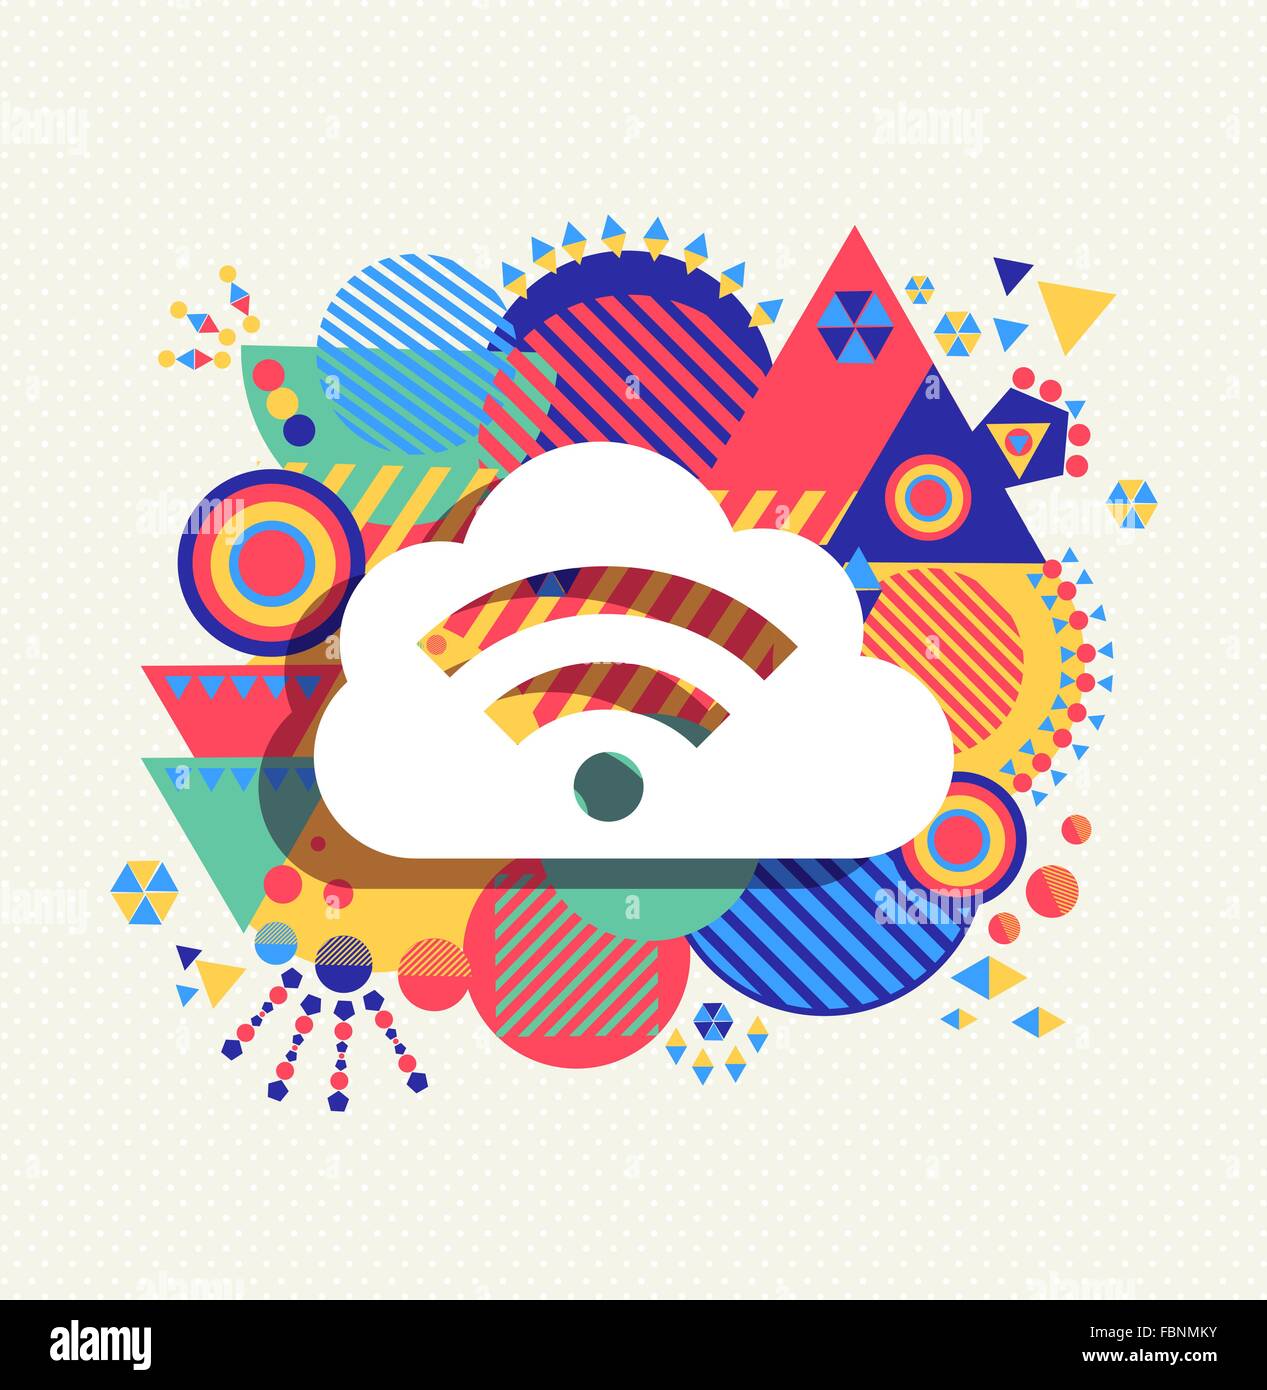 RSS feed cloud computing icon poster design with colorful vibrant geometry shapes background. Social media concept. EPS10 vector Stock Vector